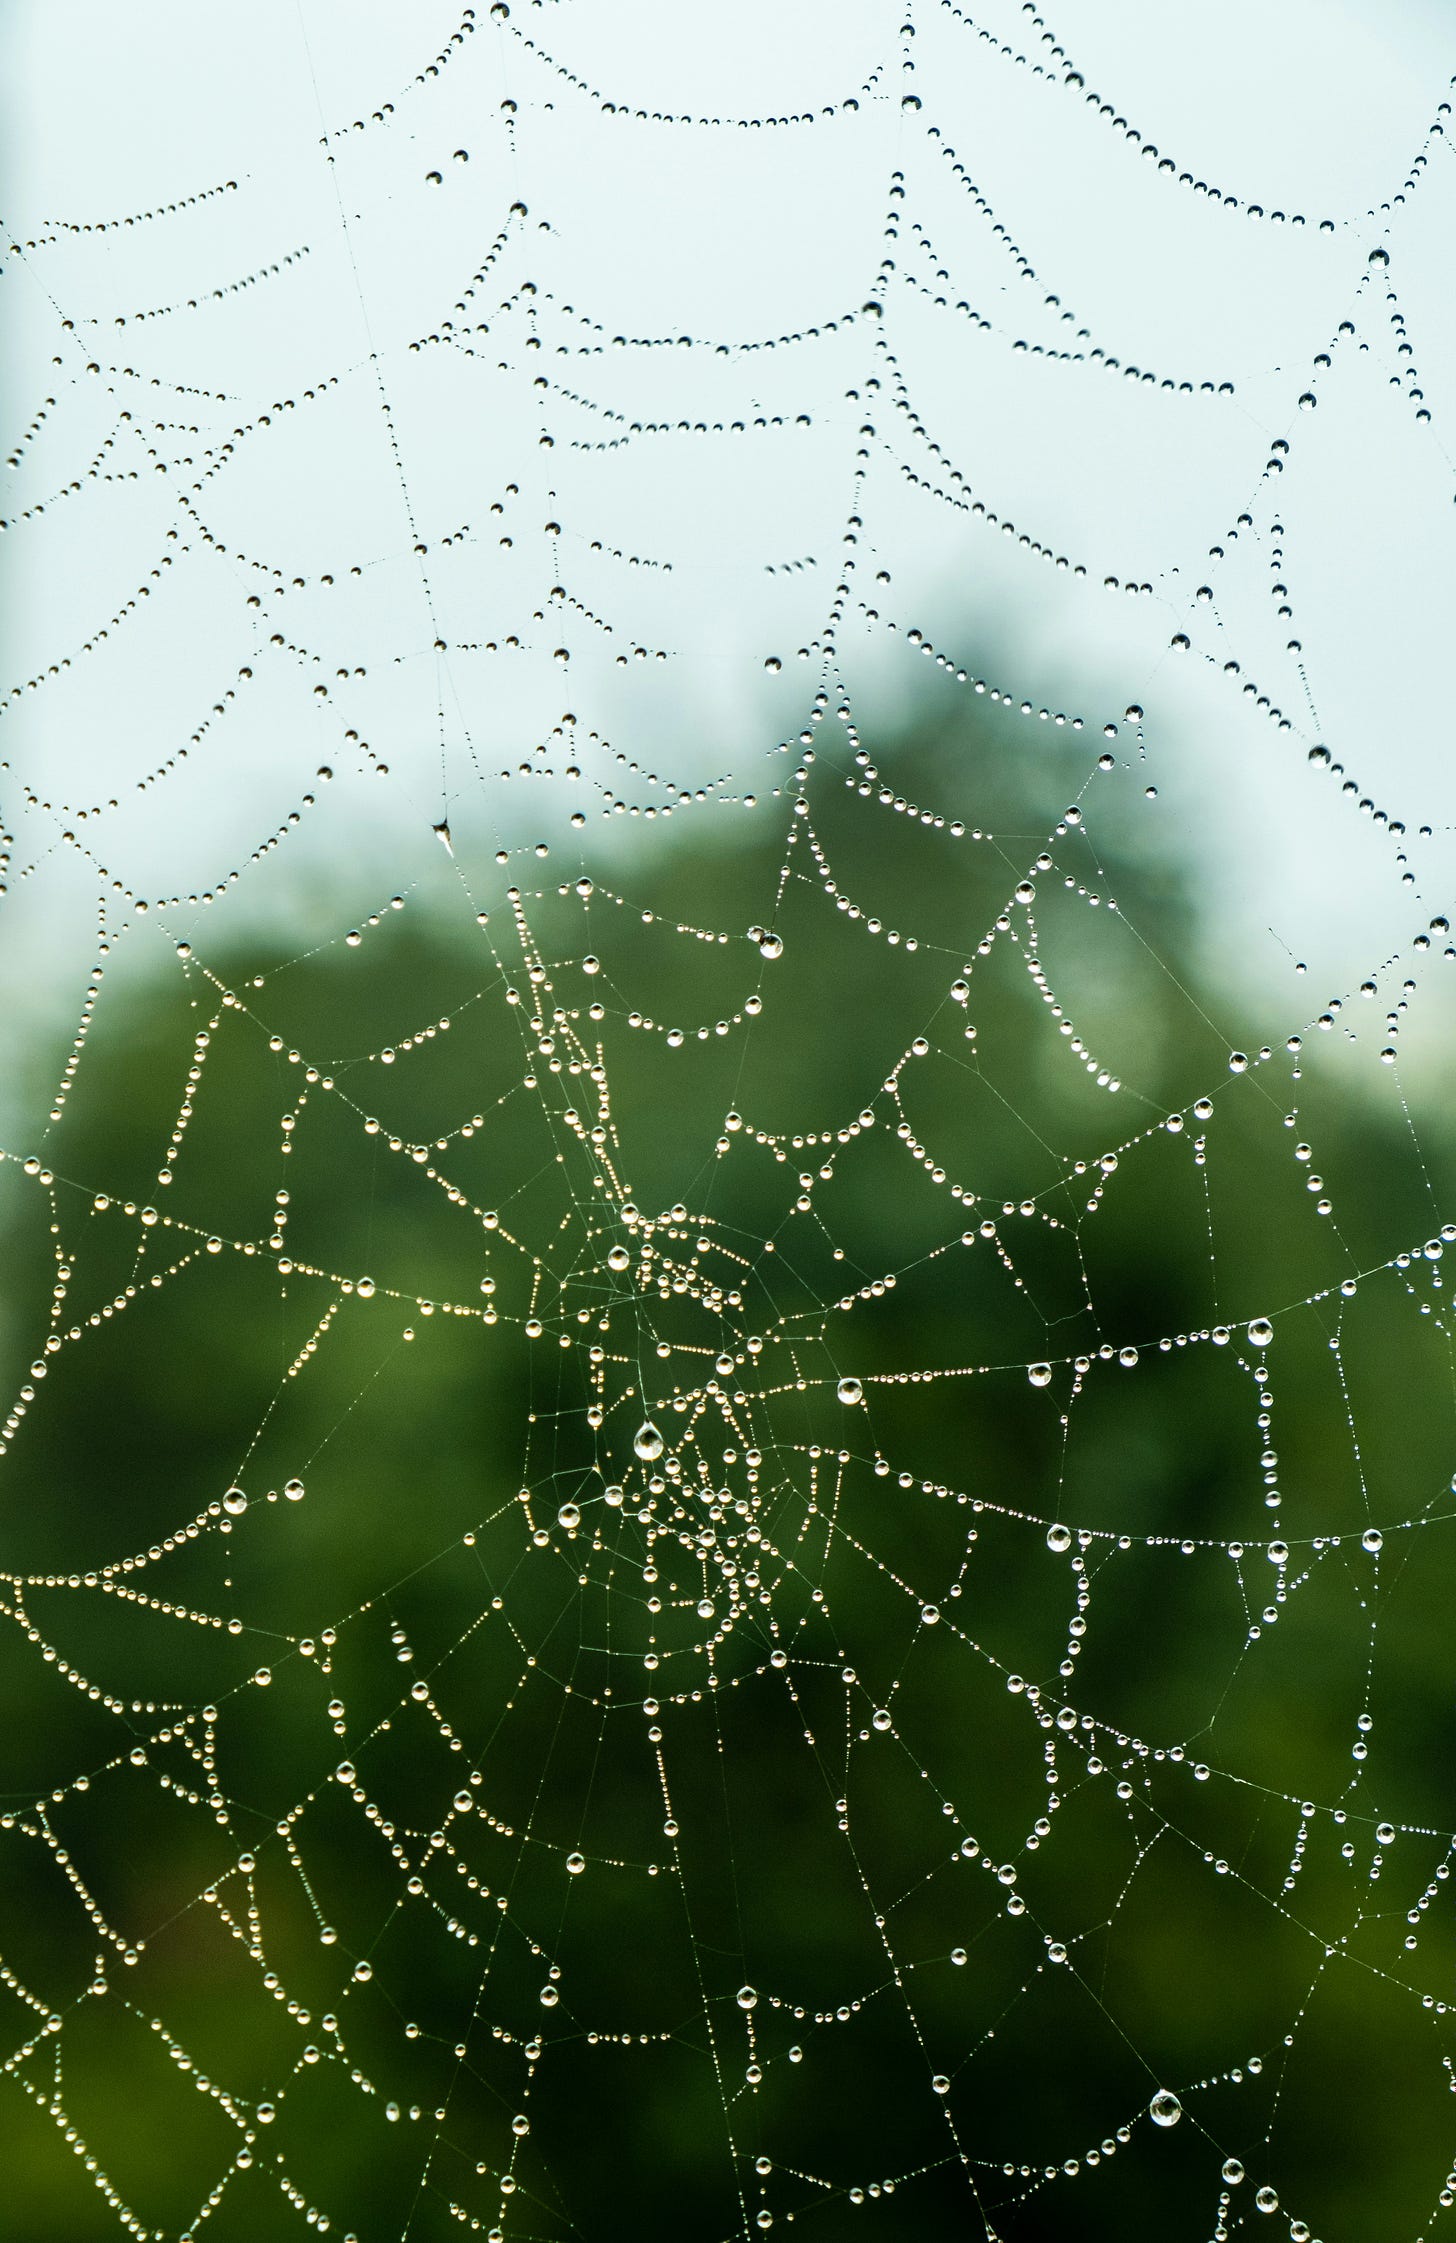 Closeup of a spiderweb covered in dew drops